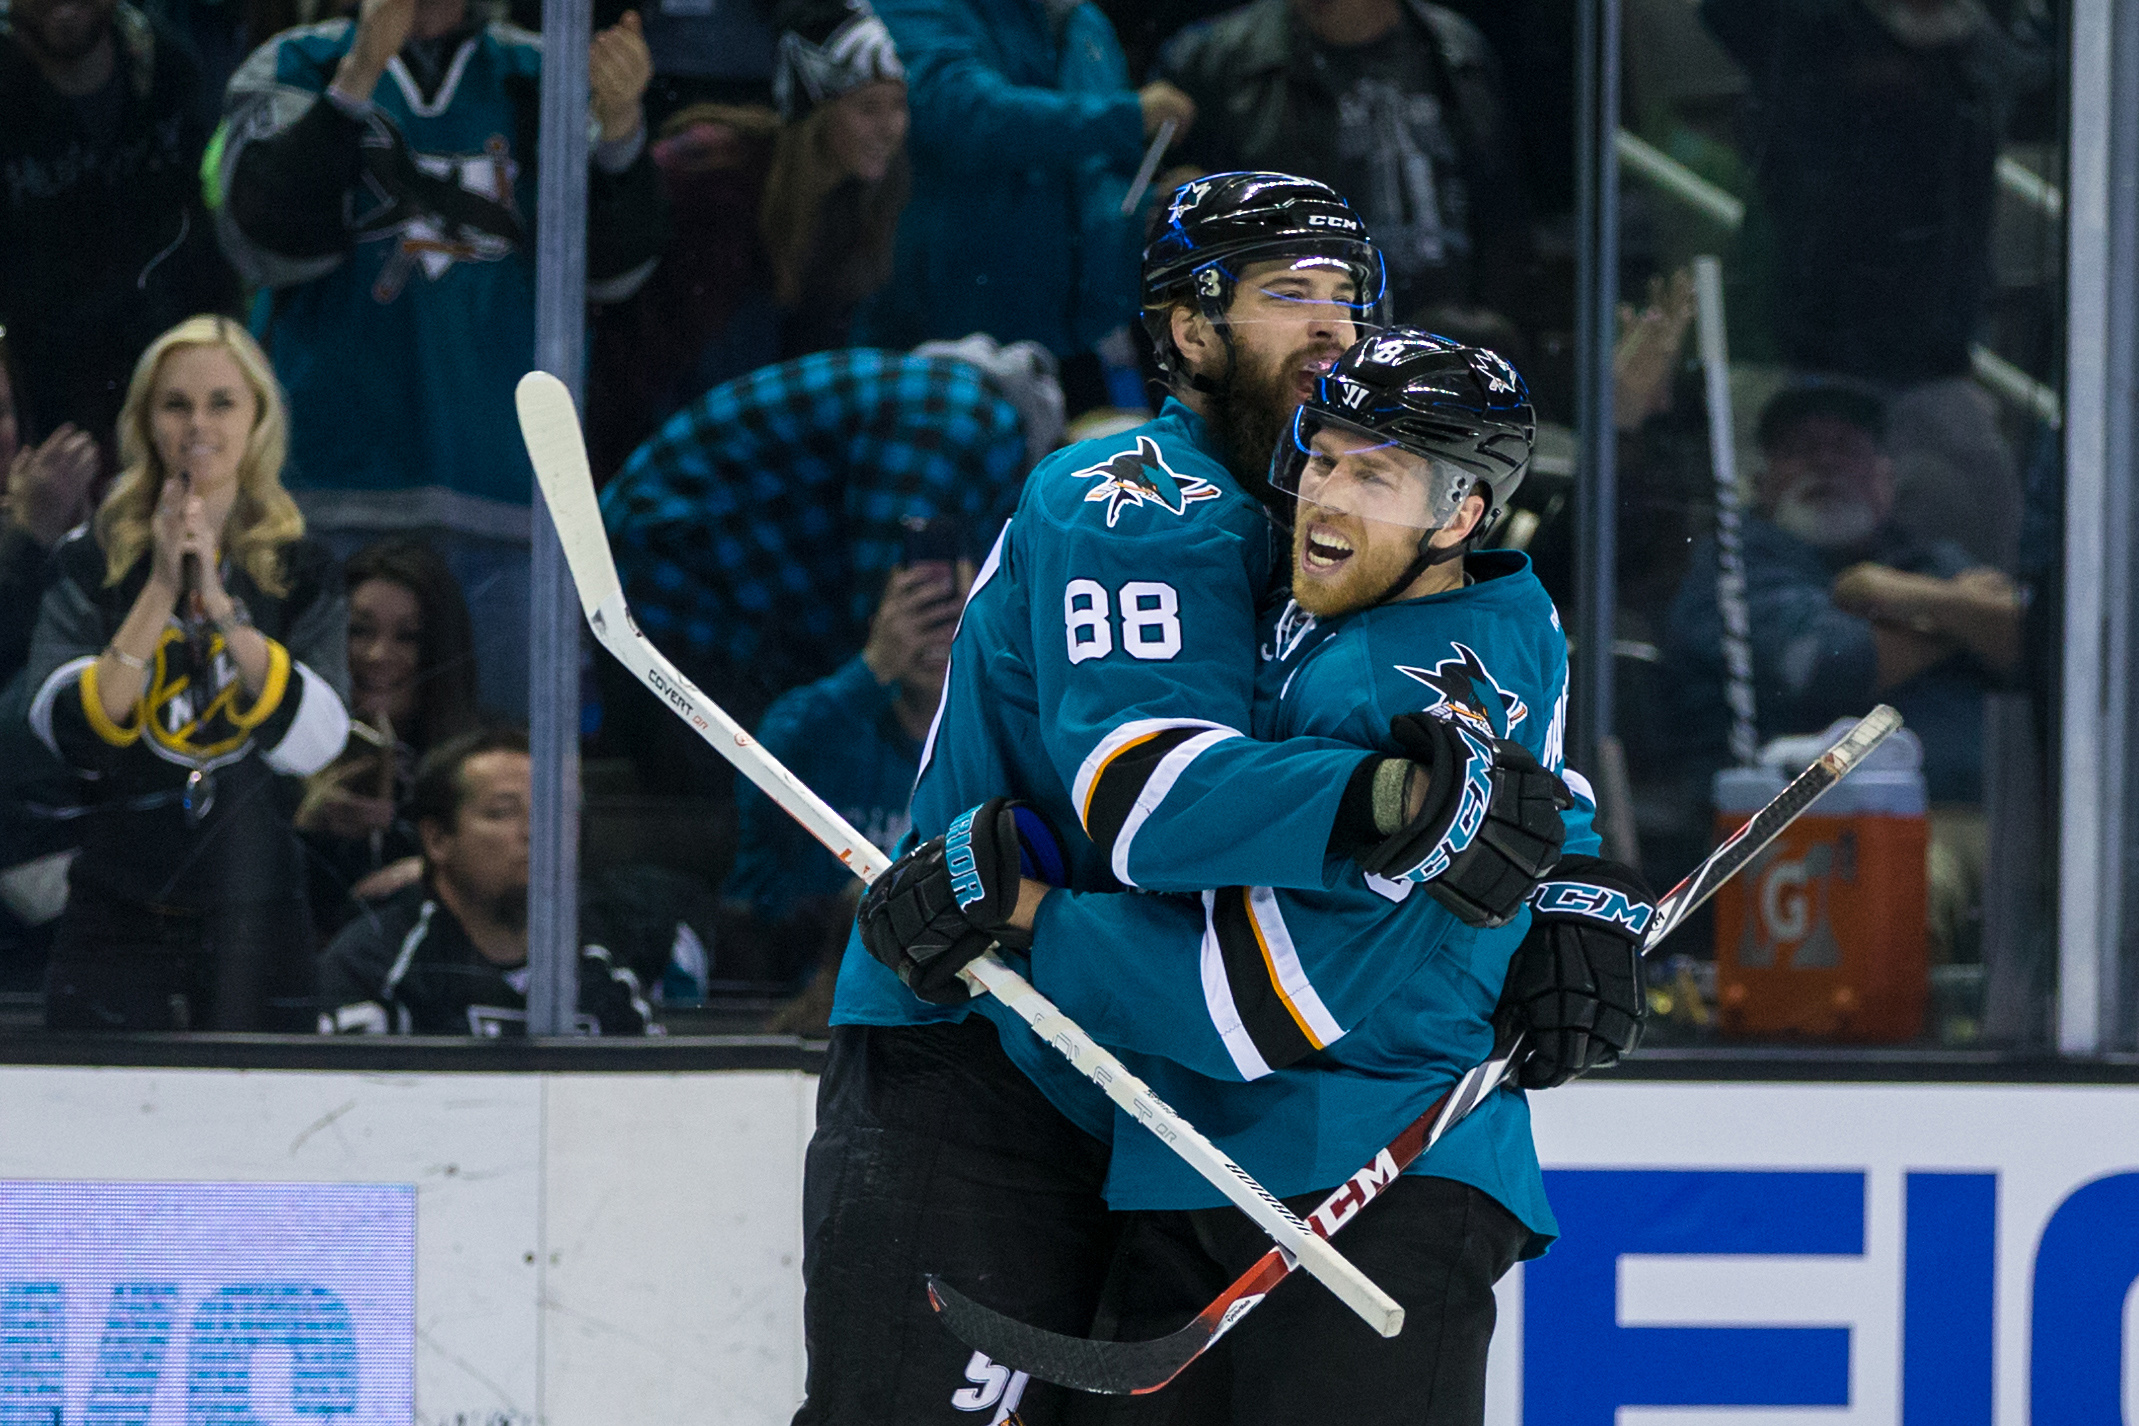 To advance in the playoffs, Kings must get past Sharks' Joe